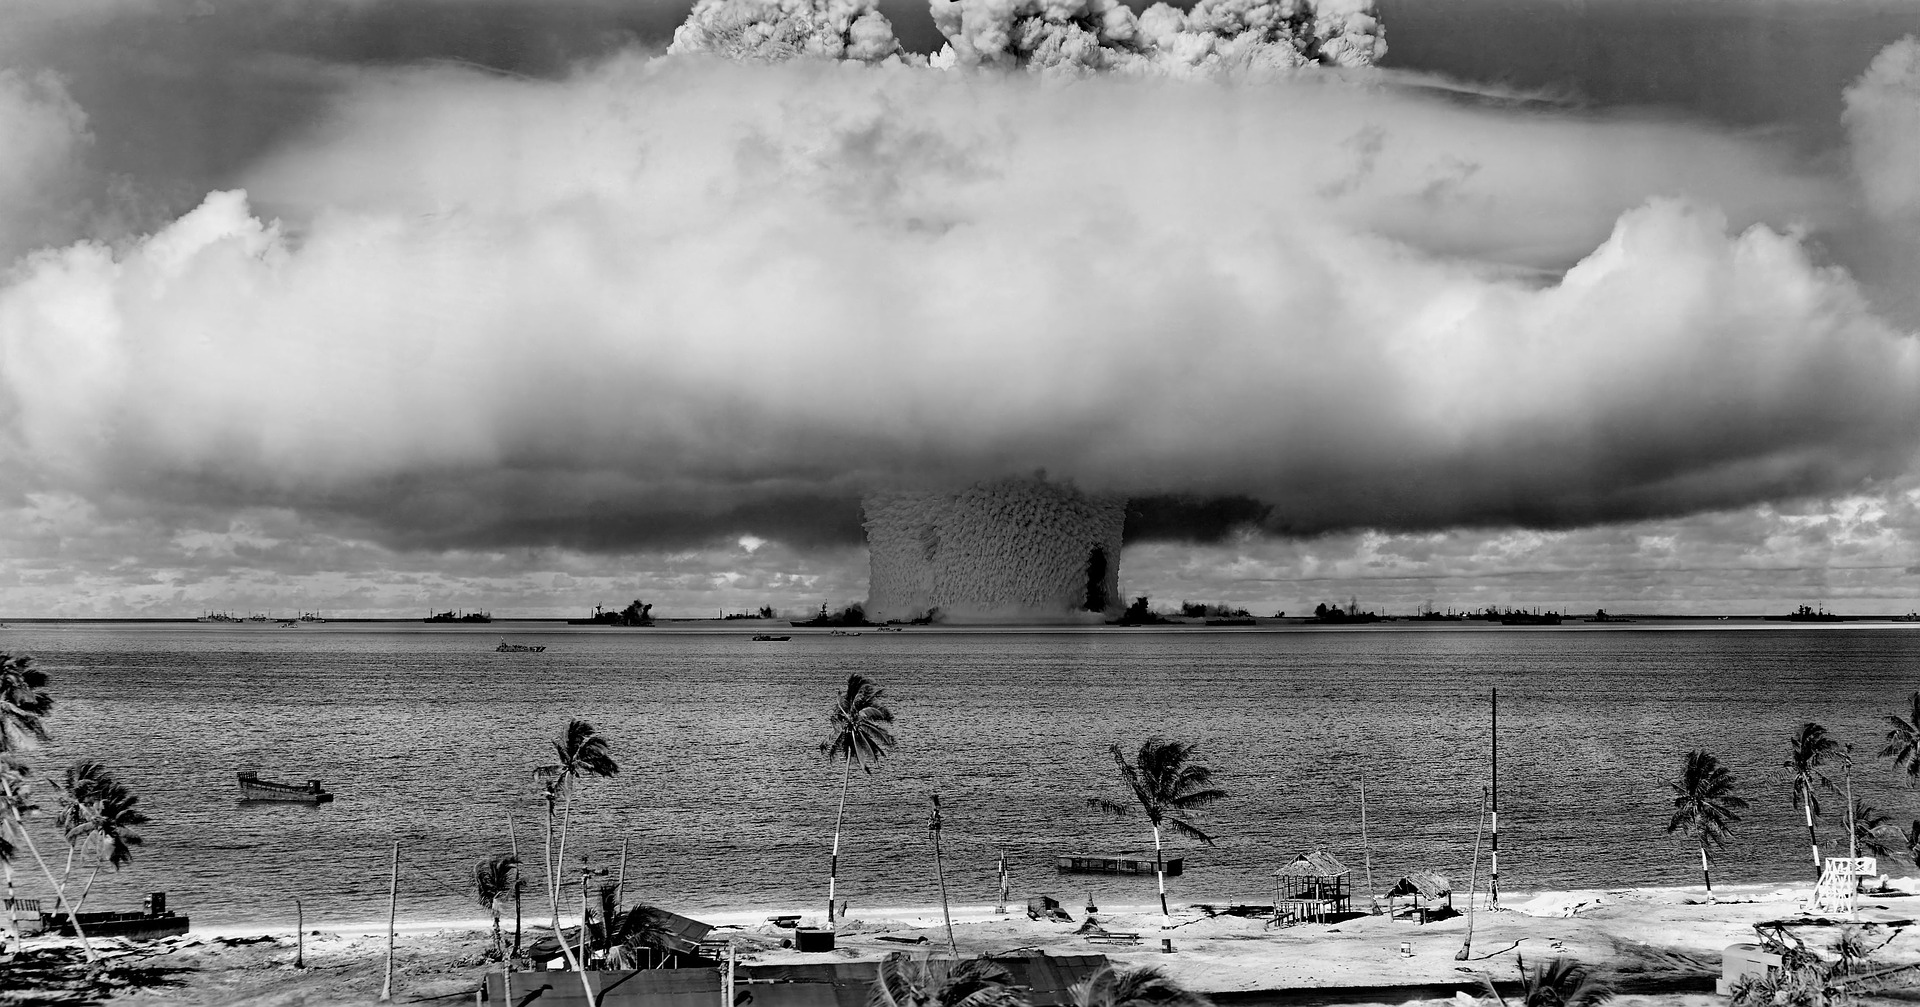 Controlling Nuclear Risks: A Basic Obligation of U.S, Law and Policy